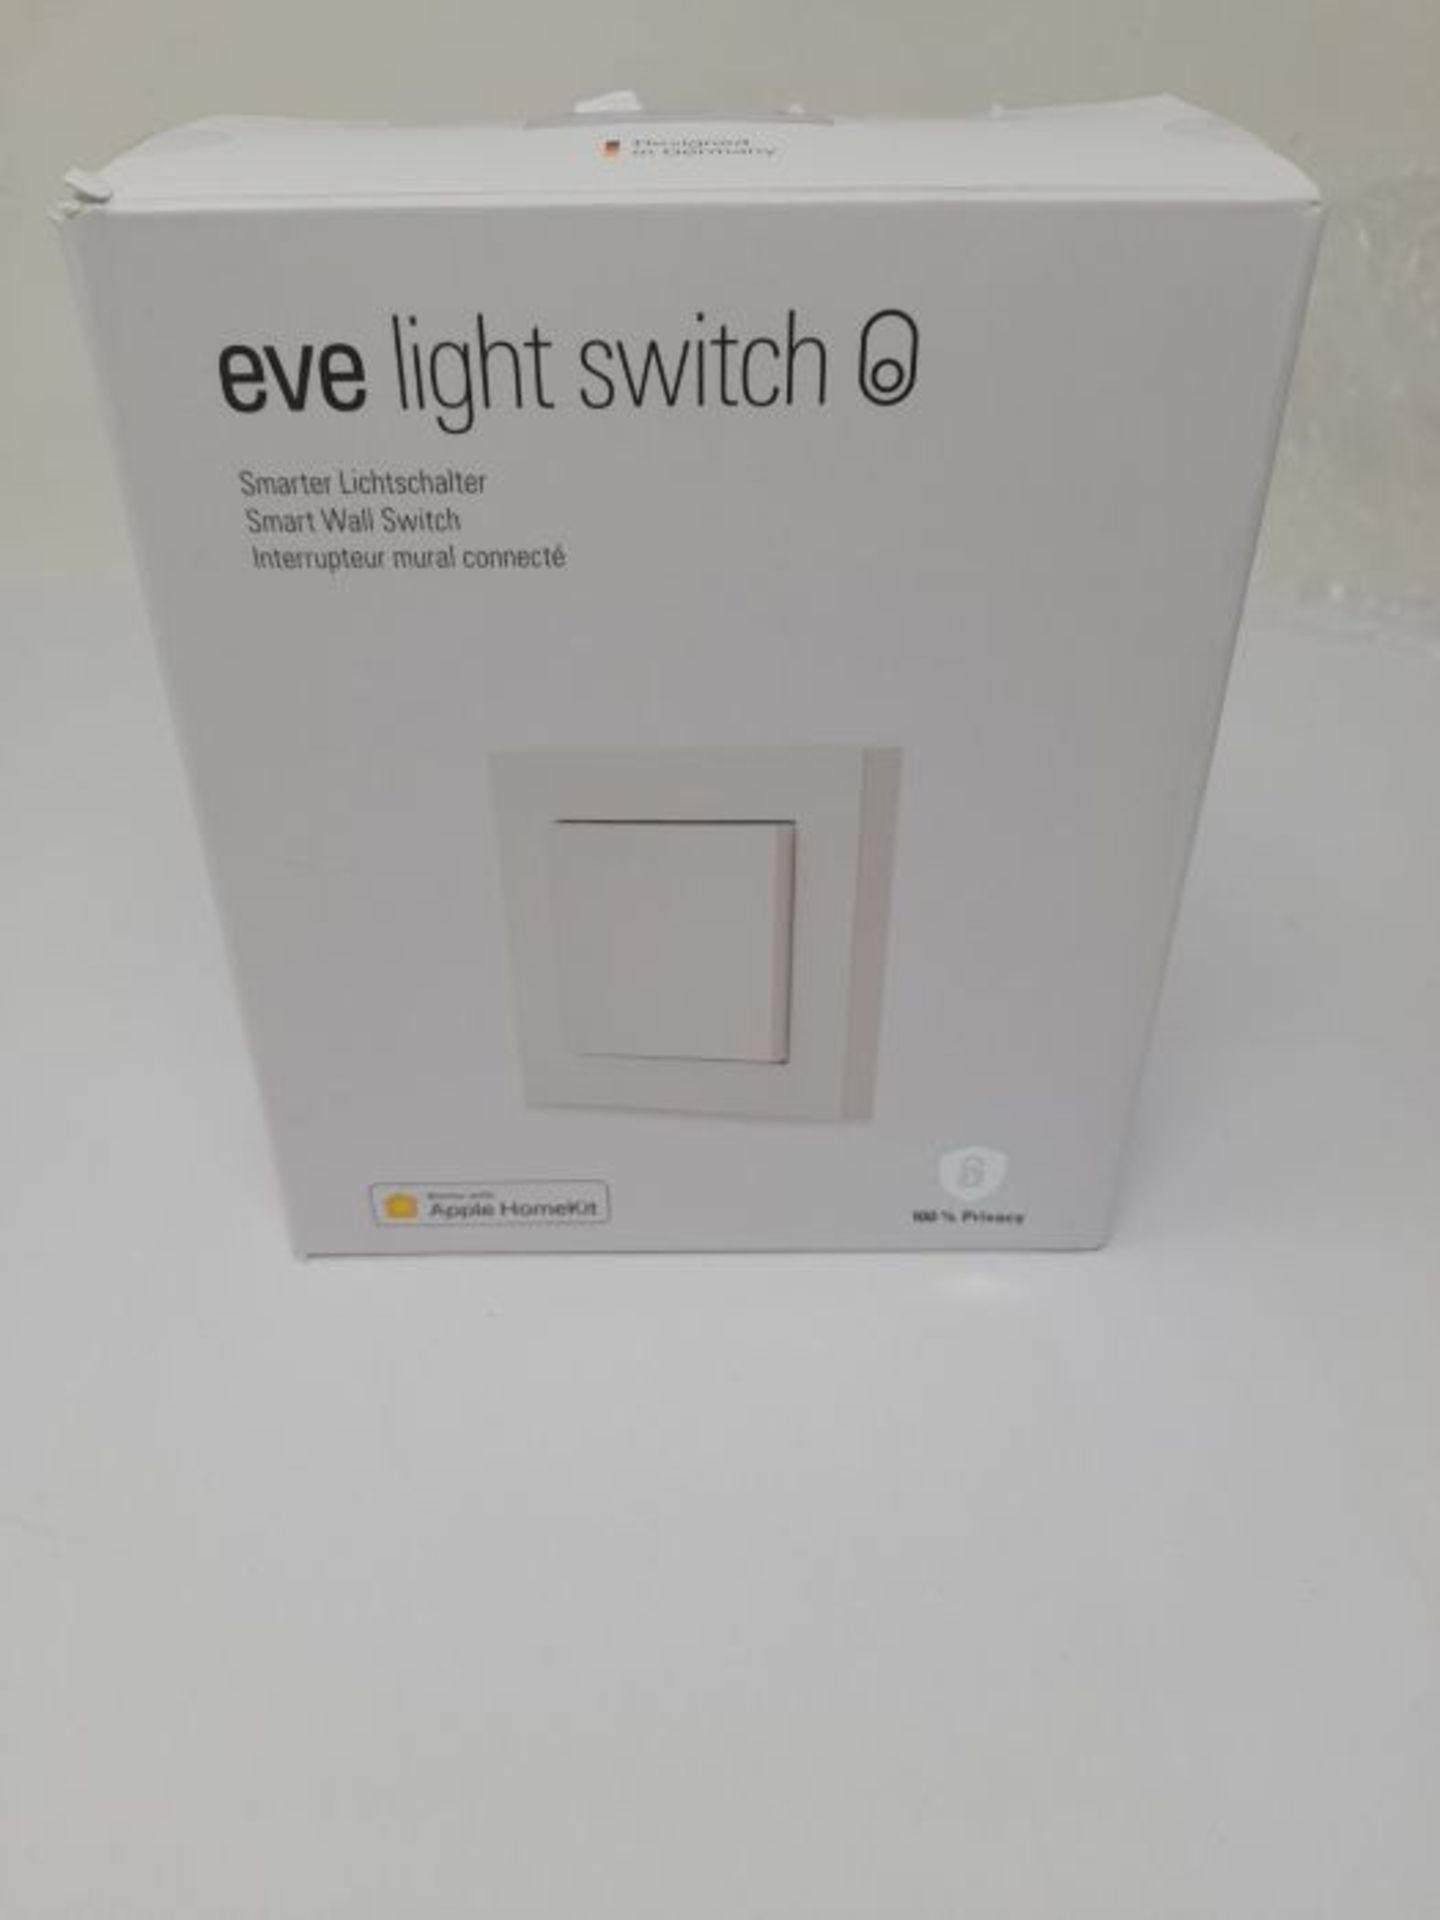 RRP £94.00 [INCOMPLETE] Eve Light Switch â¬  Smarter Lichtschalter (Apple HomeKit), Einfach- - Image 2 of 3